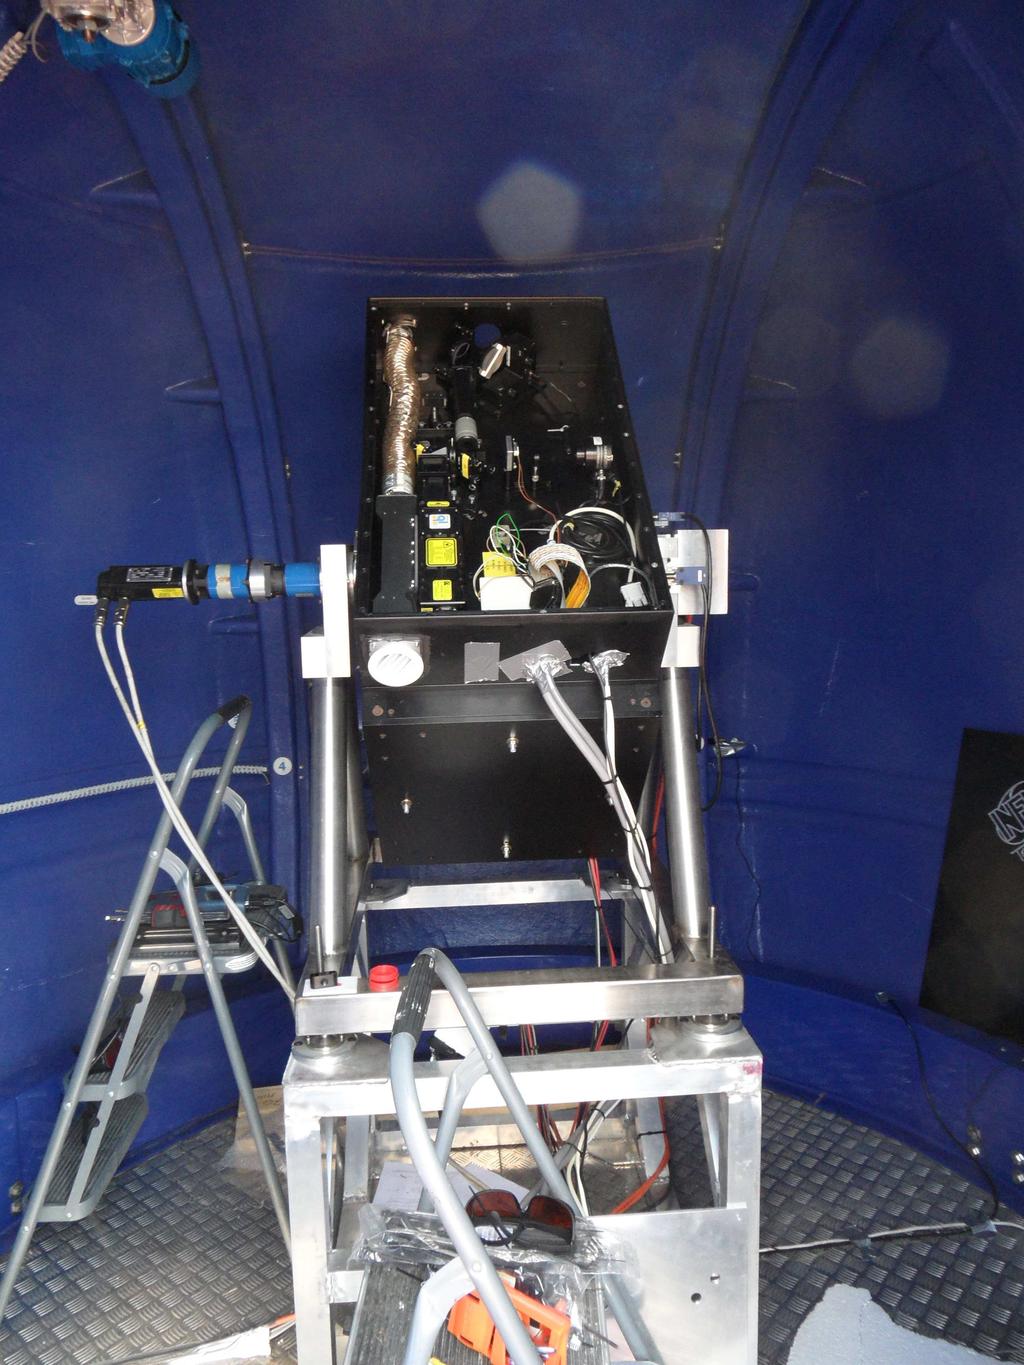 Figure 4: The ARCADE Lidar system. The black box includes the laser bench, primay mirror and receiver. The steering mechanism is visible. The system is located inside the astronomical dome.